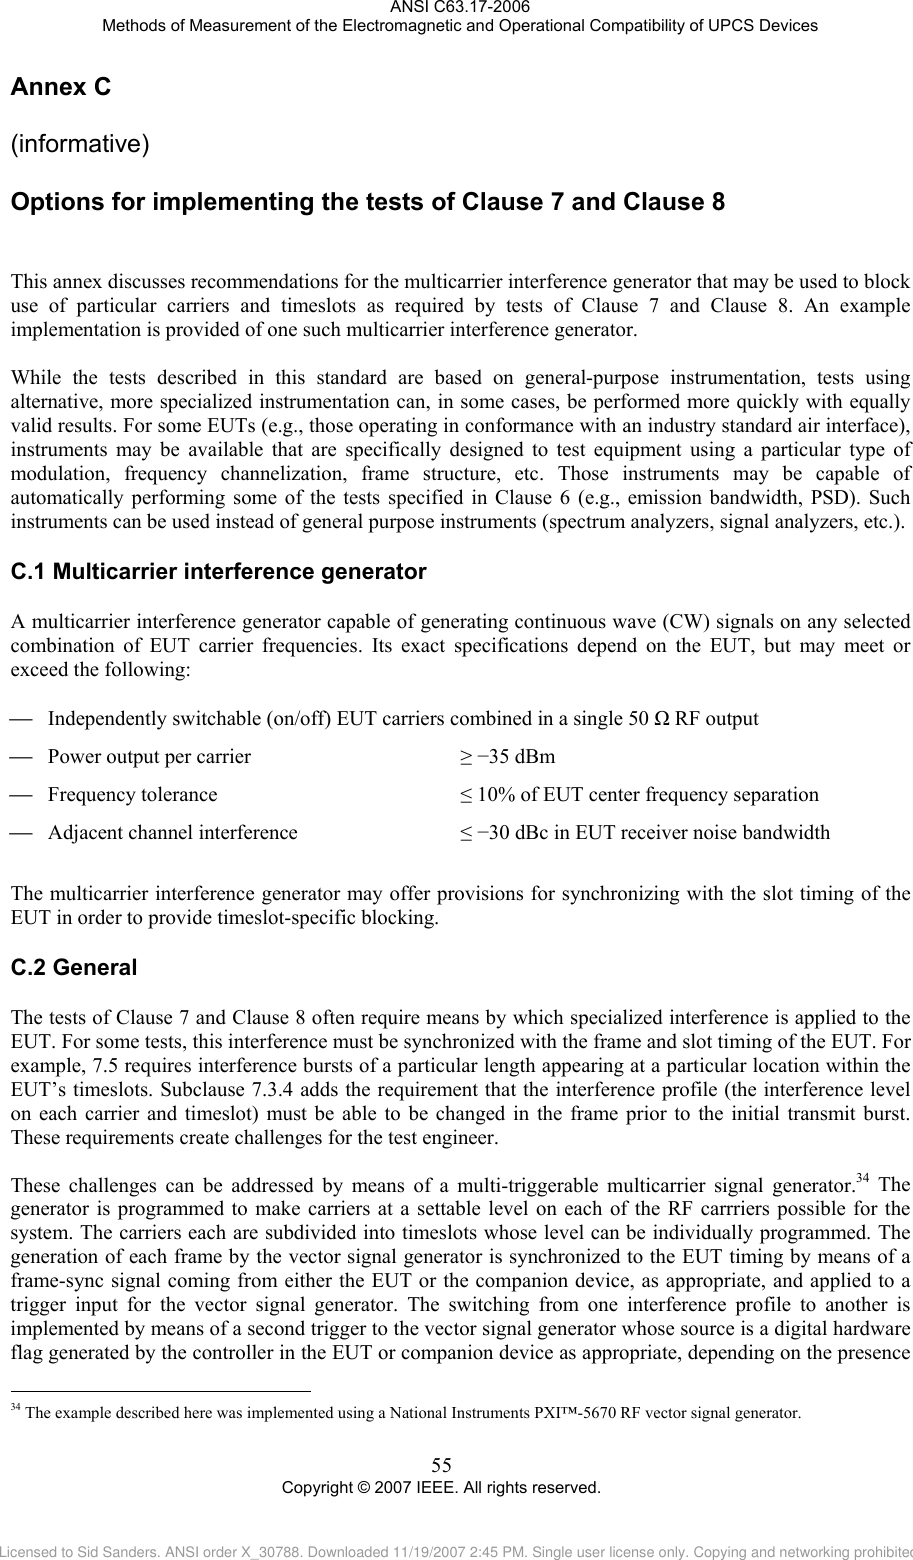 ANSI C63.17-2006 Methods of Measurement of the Electromagnetic and Operational Compatibility of UPCS Devices Annex C C.1C.2                                                 (informative) Options for implementing the tests of Clause 7 and Clause 8 This annex discusses recommendations for the multicarrier interference generator that may be used to block use of particular carriers and timeslots as required by tests of Clause 7 and Clause 8. An example implementation is provided of one such multicarrier interference generator.  While the tests described in this standard are based on general-purpose instrumentation, tests using alternative, more specialized instrumentation can, in some cases, be performed more quickly with equally valid results. For some EUTs (e.g., those operating in conformance with an industry standard air interface), instruments may be available that are specifically designed to test equipment using a particular type of modulation, frequency channelization, frame structure, etc. Those instruments may be capable of automatically performing some of the tests specified in Clause 6 (e.g., emission bandwidth, PSD). Such instruments can be used instead of general purpose instruments (spectrum analyzers, signal analyzers, etc.).   Multicarrier interference generator A multicarrier interference generator capable of generating continuous wave (CW) signals on any selected combination of EUT carrier frequencies. Its exact specifications depend on the EUT, but may meet or exceed the following:  ⎯ Independently switchable (on/off) EUT carriers combined in a single 50 Ω RF output ⎯ Power output per carrier    ≥ −35 dBm ⎯ Frequency tolerance    ≤ 10% of EUT center frequency separation ⎯ Adjacent channel interference    ≤ −30 dBc in EUT receiver noise bandwidth  The multicarrier interference generator may offer provisions for synchronizing with the slot timing of the EUT in order to provide timeslot-specific blocking.  General The tests of Clause 7 and Clause 8 often require means by which specialized interference is applied to the EUT. For some tests, this interference must be synchronized with the frame and slot timing of the EUT. For example, 7.5 requires interference bursts of a particular length appearing at a particular location within the EUT’s timeslots. Subclause 7.3.4 adds the requirement that the interference profile (the interference level on each carrier and timeslot) must be able to be changed in the frame prior to the initial transmit burst. These requirements create challenges for the test engineer.   These challenges can be addressed by means of a multi-triggerable multicarrier signal generator.34 The generator is programmed to make carriers at a settable level on each of the RF carrriers possible for the system. The carriers each are subdivided into timeslots whose level can be individually programmed. The generation of each frame by the vector signal generator is synchronized to the EUT timing by means of a frame-sync signal coming from either the EUT or the companion device, as appropriate, and applied to a trigger input for the vector signal generator. The switching from one interference profile to another is implemented by means of a second trigger to the vector signal generator whose source is a digital hardware flag generated by the controller in the EUT or companion device as appropriate, depending on the presence  34 The example described here was implemented using a National Instruments PXI™-5670 RF vector signal generator. 55 Copyright © 2007 IEEE. All rights reserved. Licensed to Sid Sanders. ANSI order X_30788. Downloaded 11/19/2007 2:45 PM. Single user license only. Copying and networking prohibited.